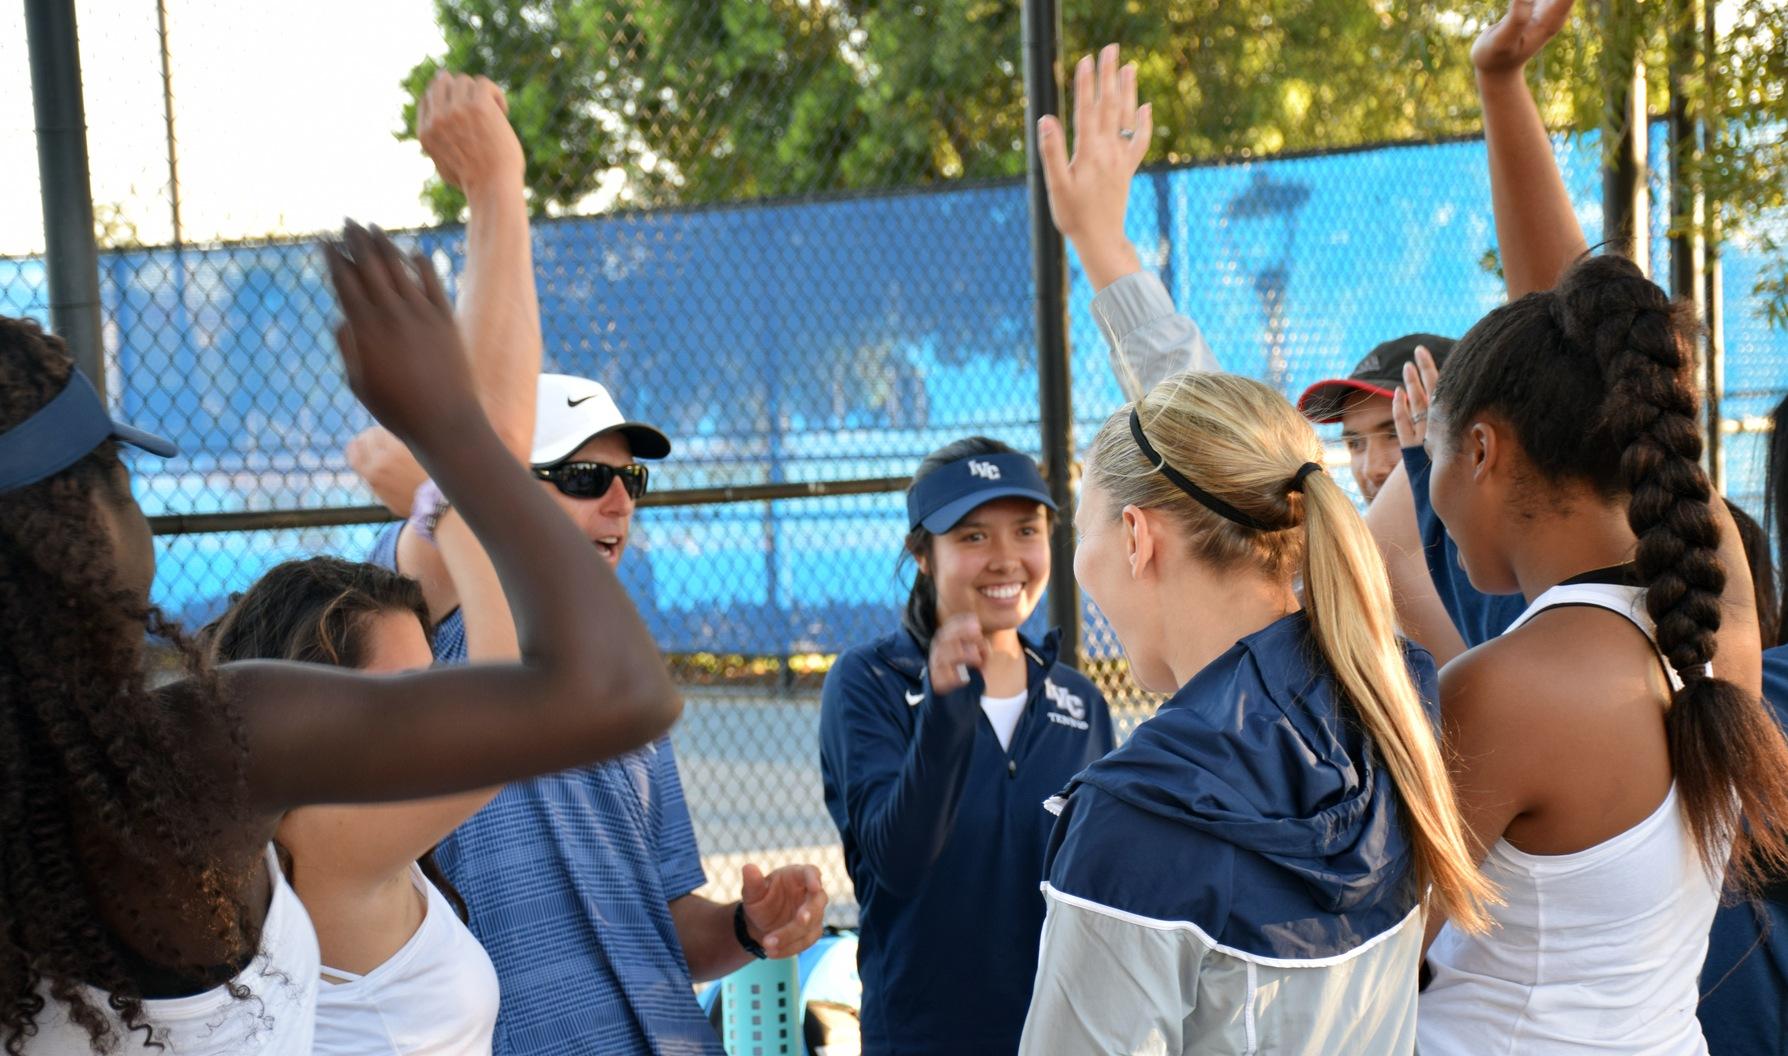 Women's tennis team sweeps another conference opponent